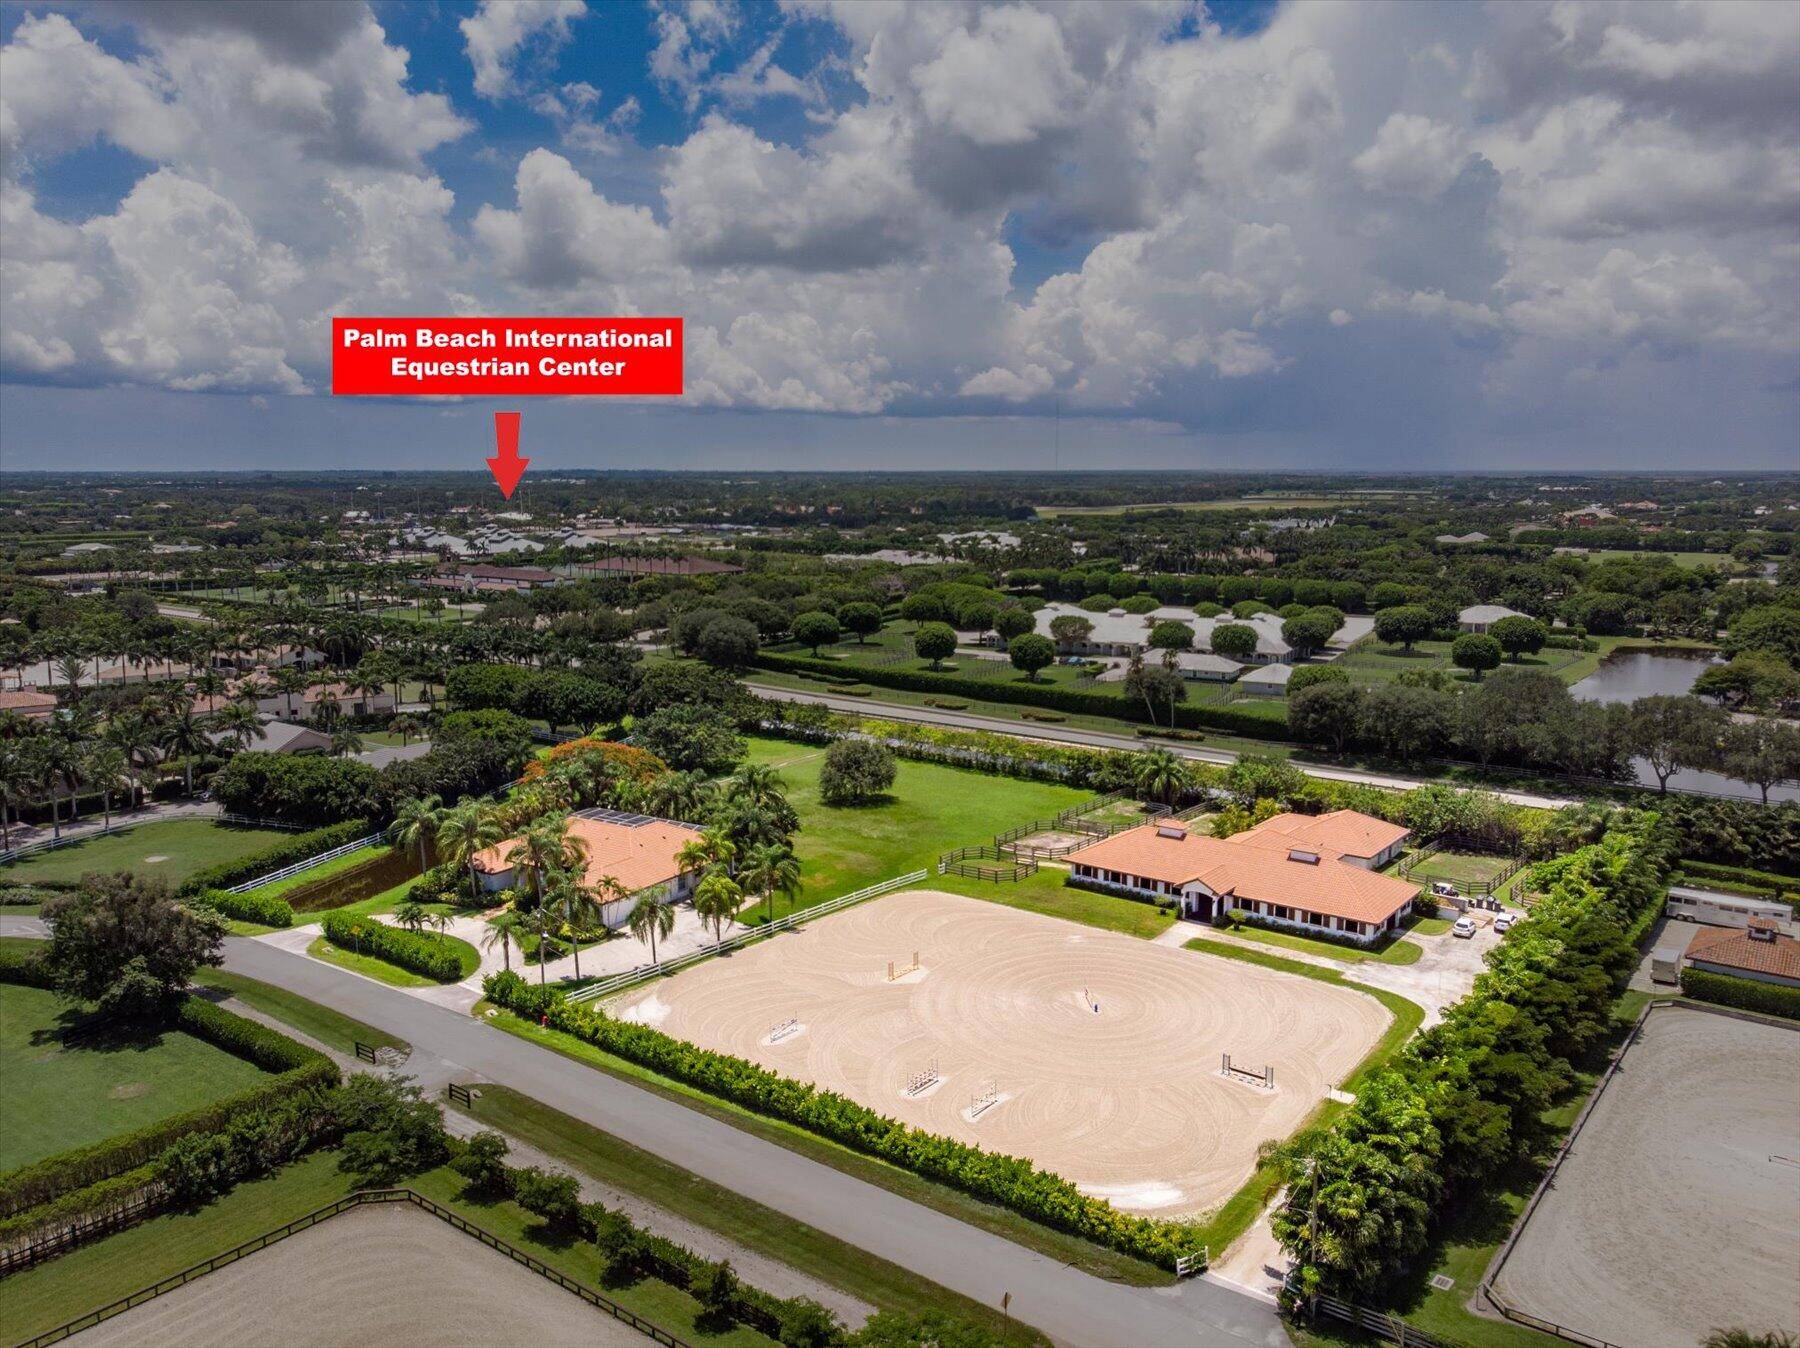 This 3. 8 acre equestrian estate's proximity to the Wellington International showgrounds is so desirable that it's akin to having an oceanfront or front row location.